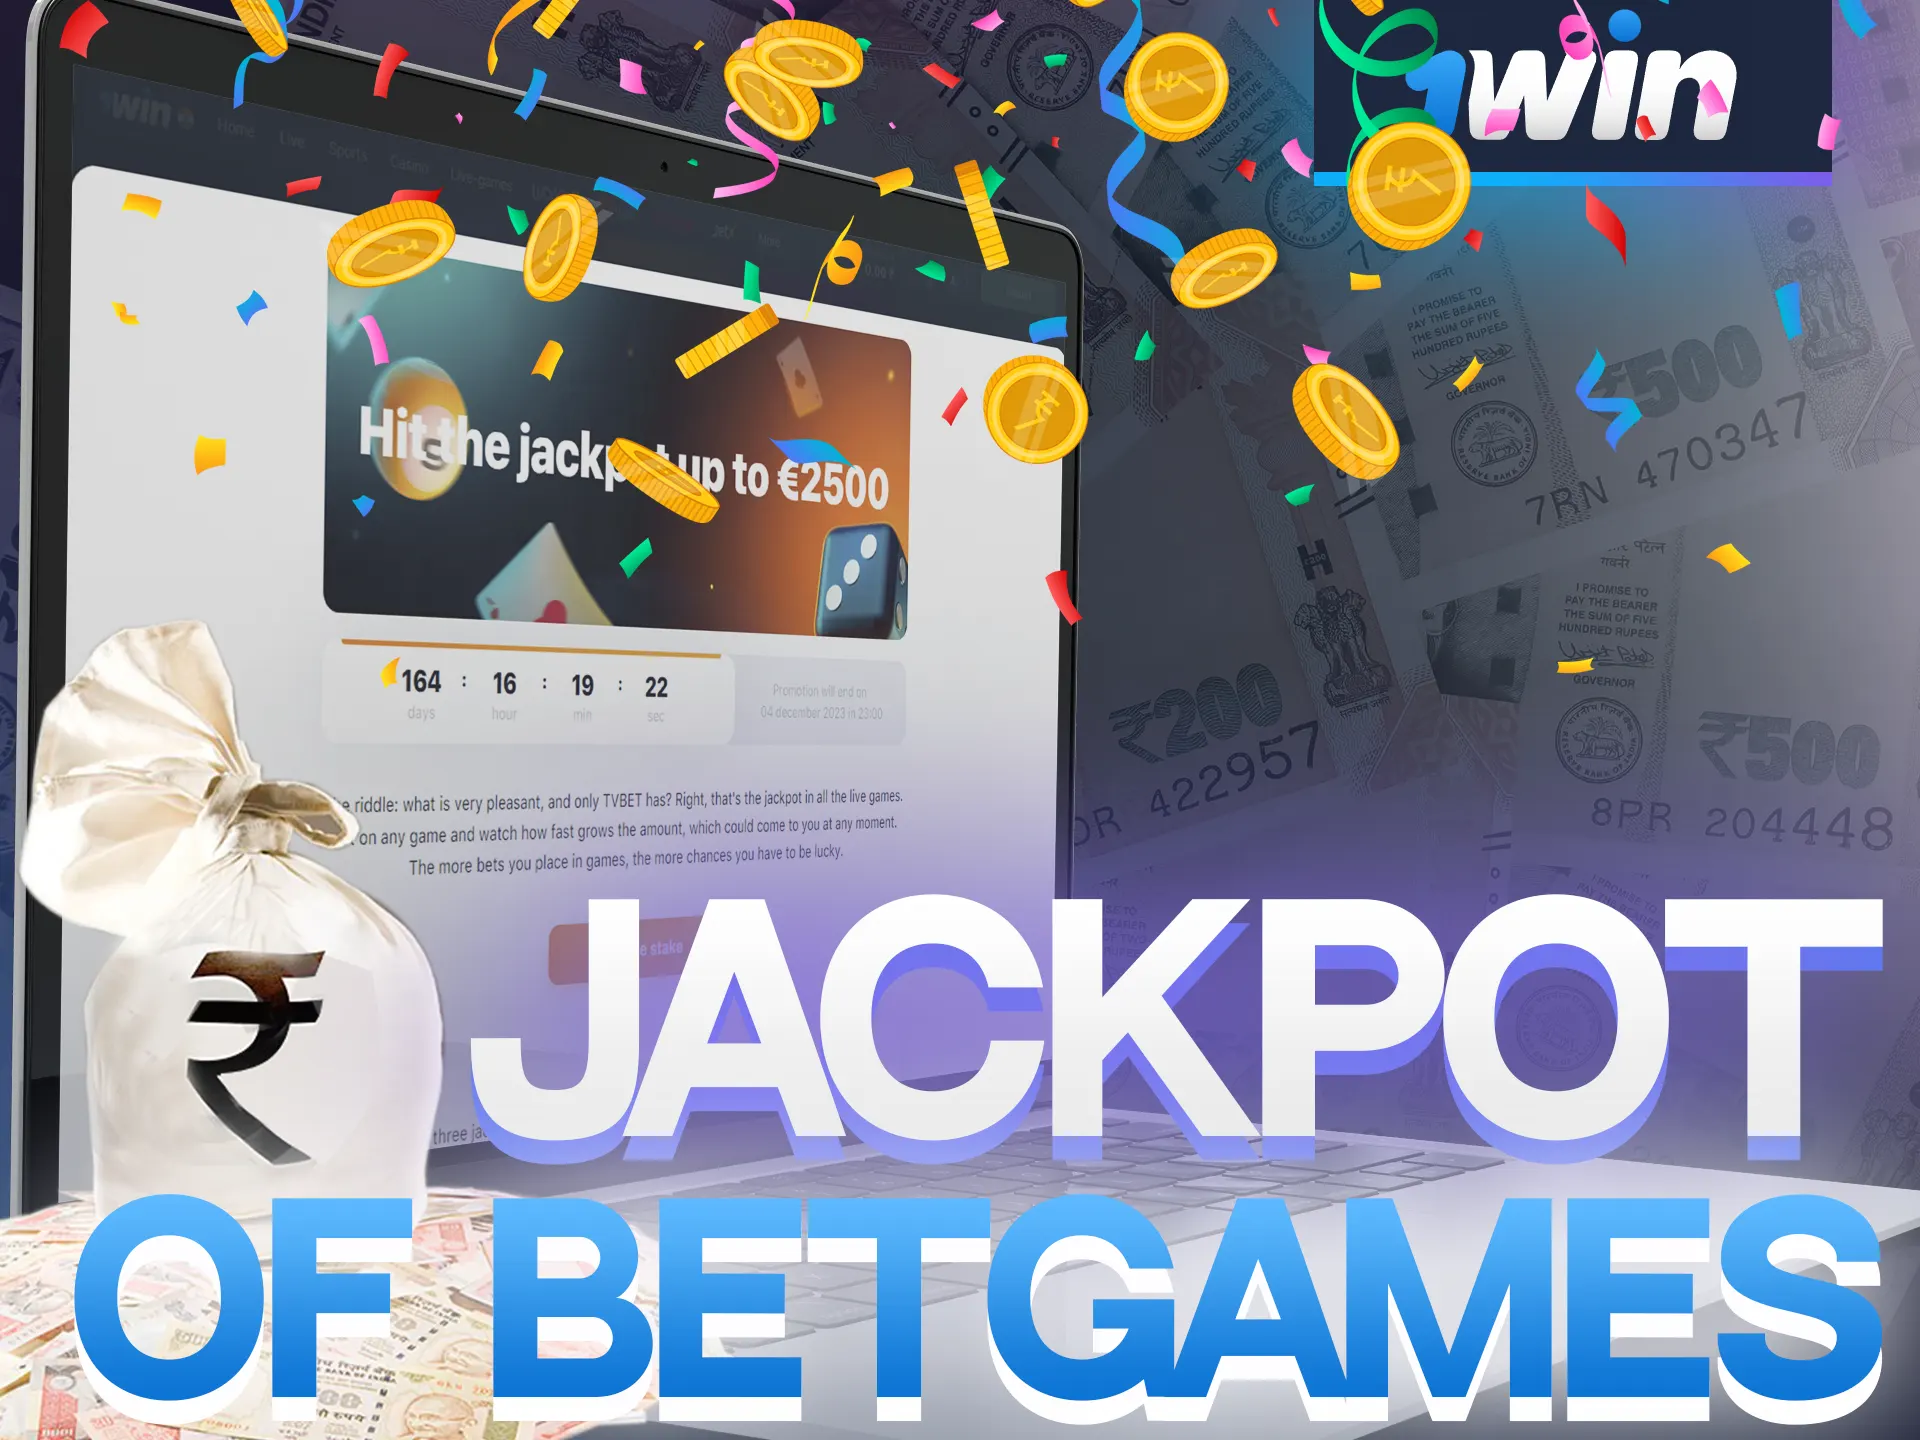 Hit your jackpot on 1Win.